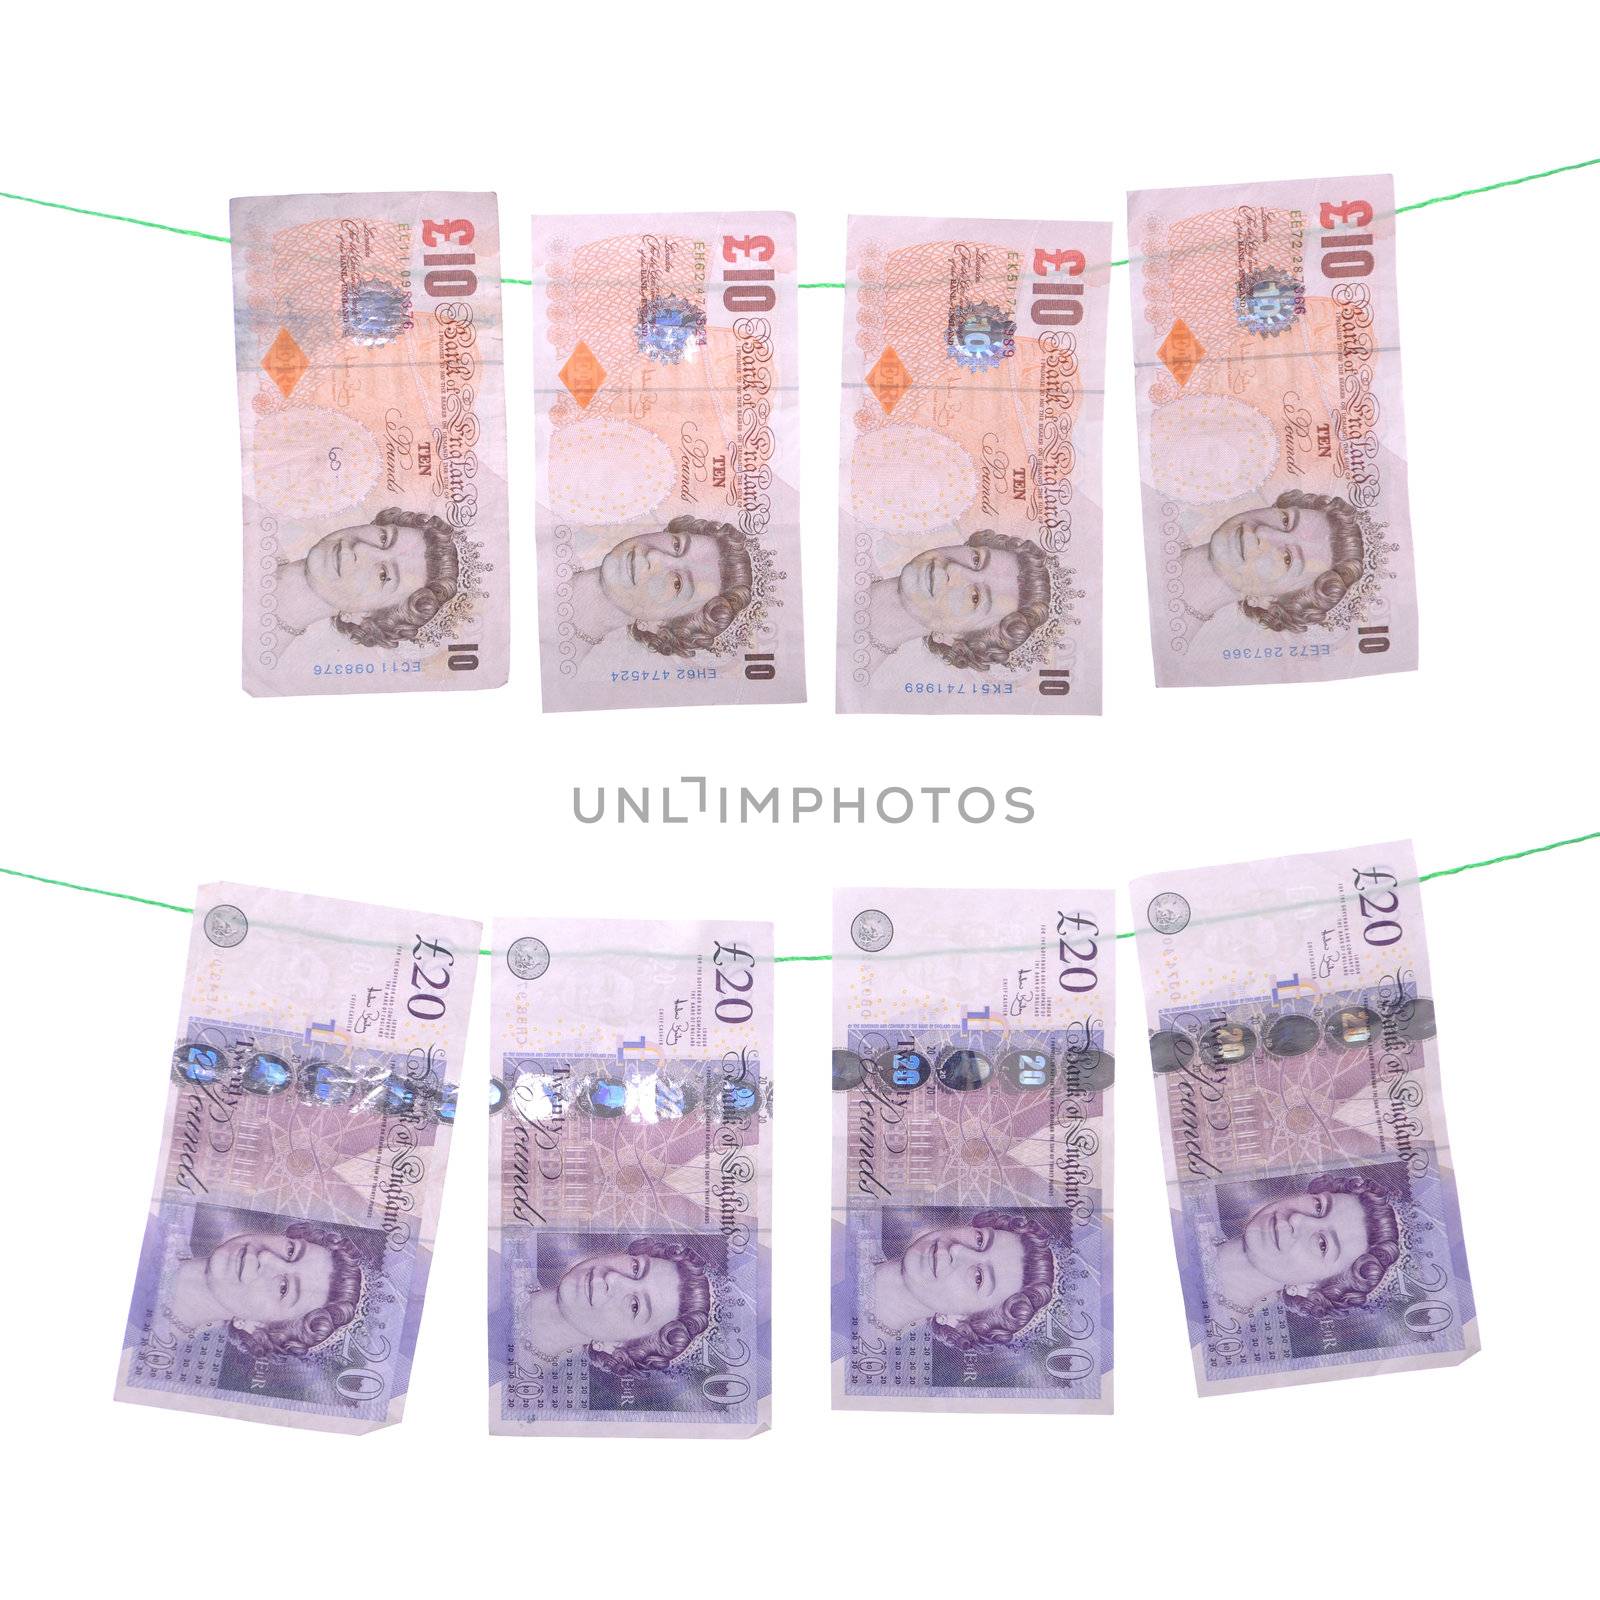 money laundering concept with pound notes (isolated on white background)